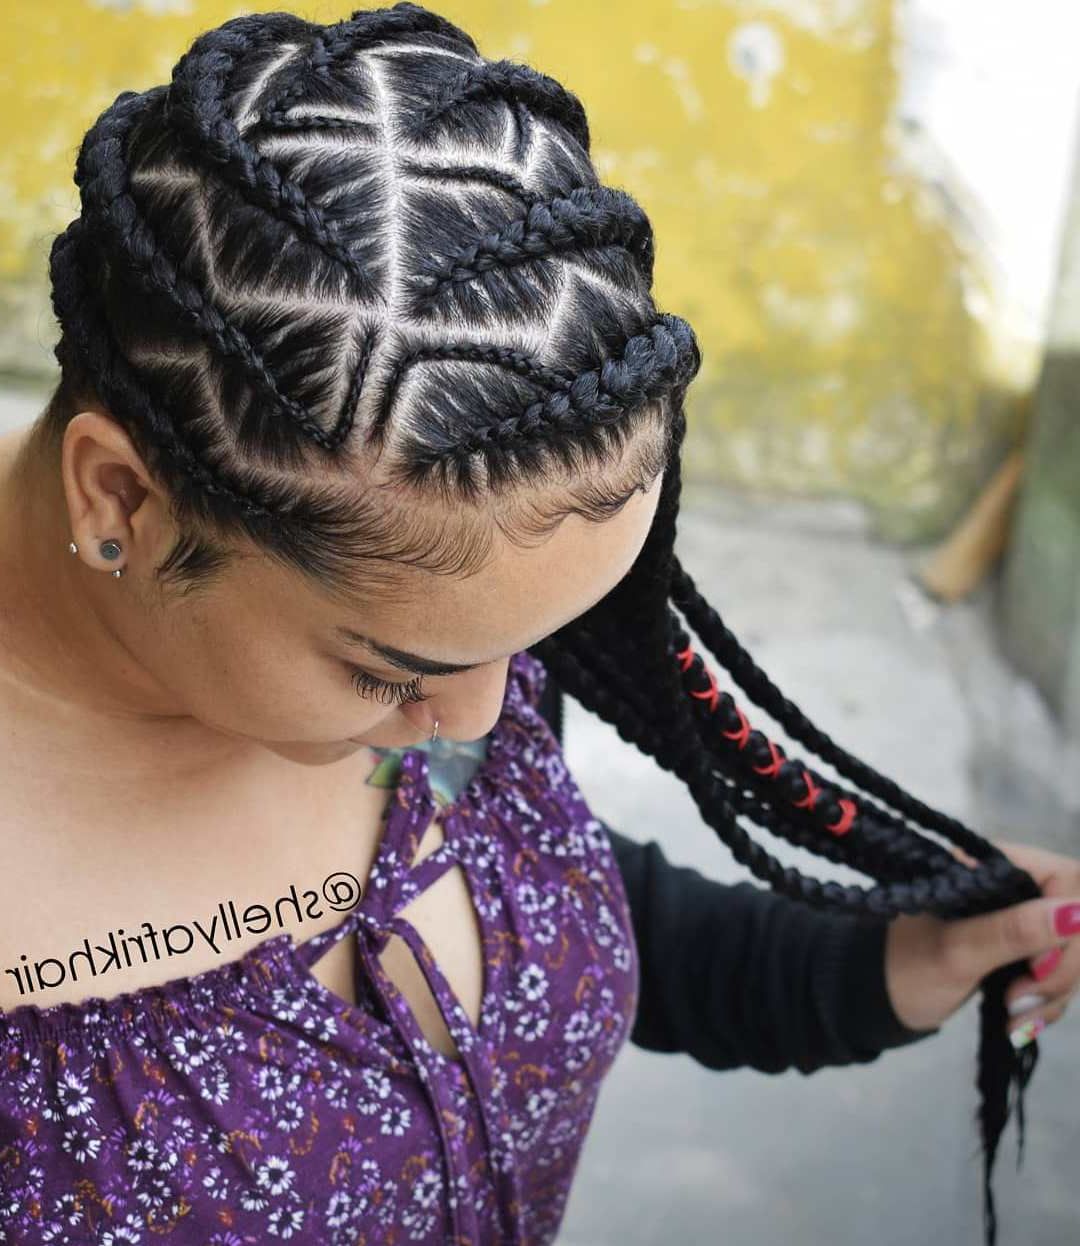 Trendy Full Scalp Patterned Side Braided Hairstyles Within 20 Head Turning Lemonade Braid Styles For All Ages (View 3 of 20)